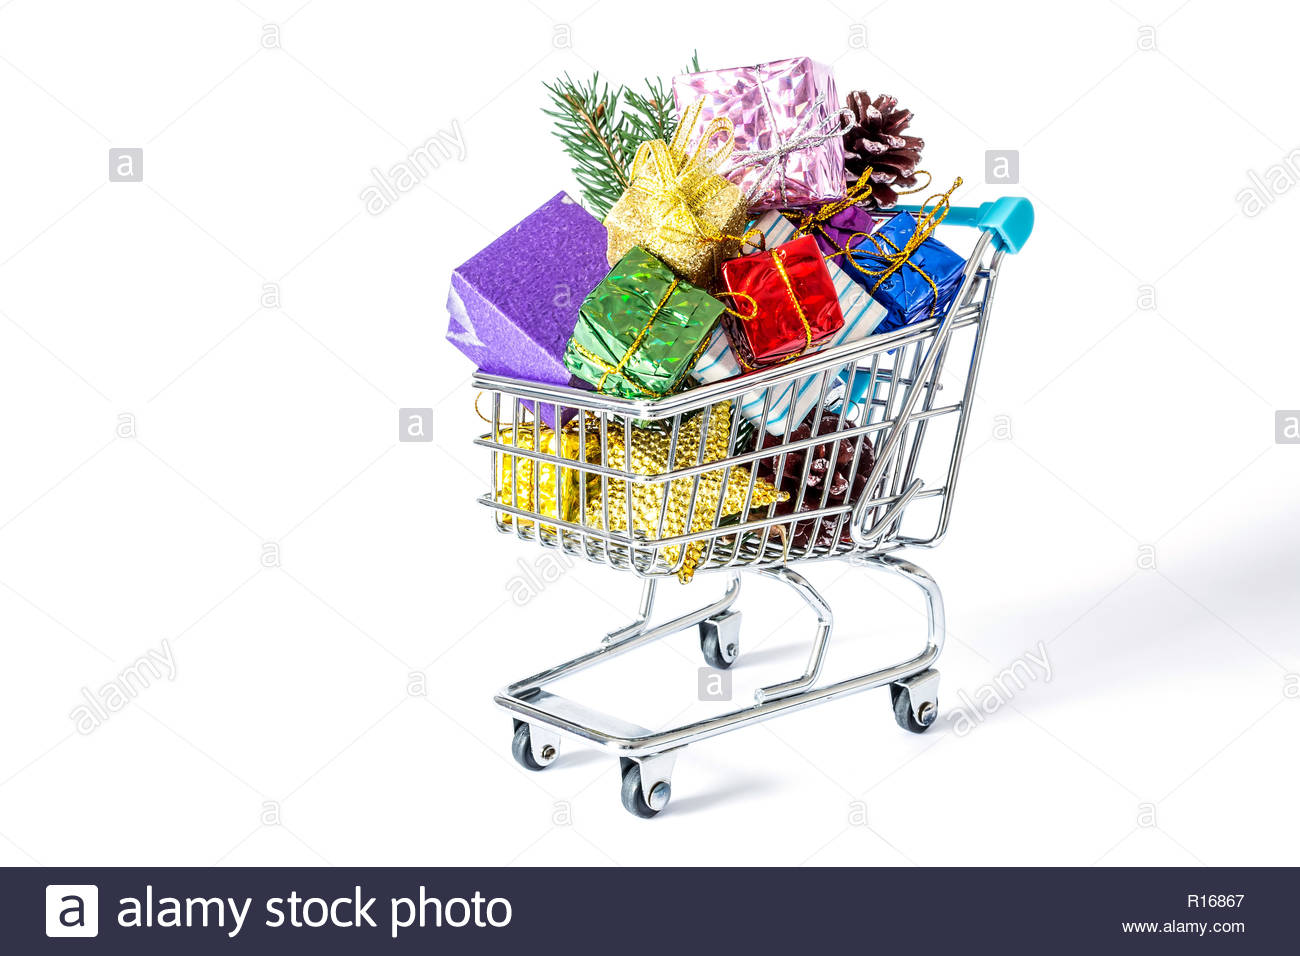 New Year S Gifts In A Shopping Trolley Close Up Isolated On